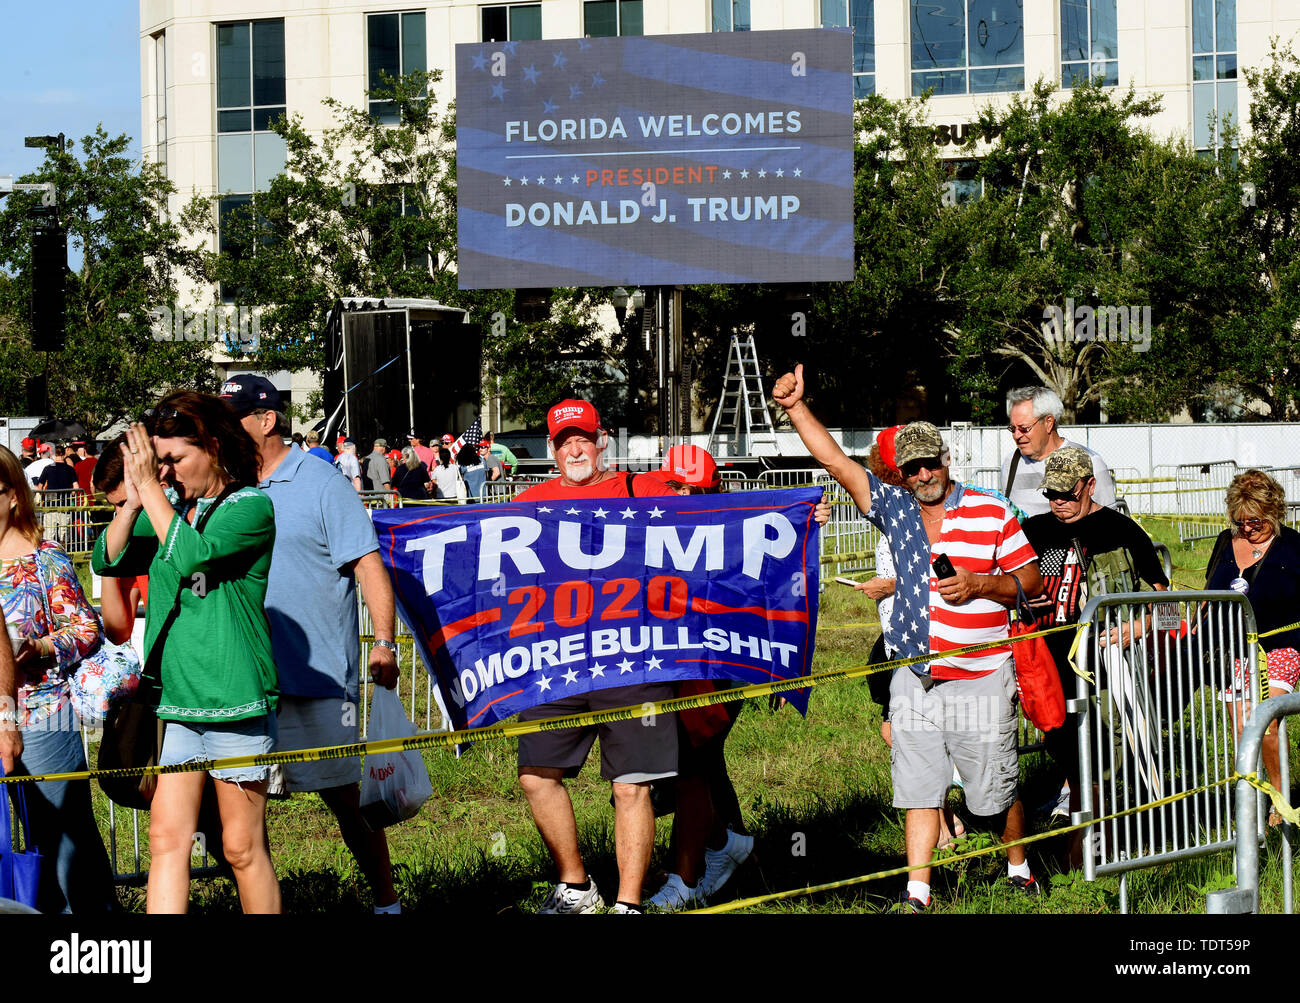 Orlando, Florida, USA. 18th June, 2019. Supporters of U.S. President Donald Trump arrive for a Make America Great Again rally at the Amway Center on June 18, 2019 in Orlando, Florida. The rally is billed as Trump's kick-off event for his campaign for re-election in 2020. (Paul Hennessy/Alamy) Credit: Paul Hennessy/Alamy Live News Stock Photo